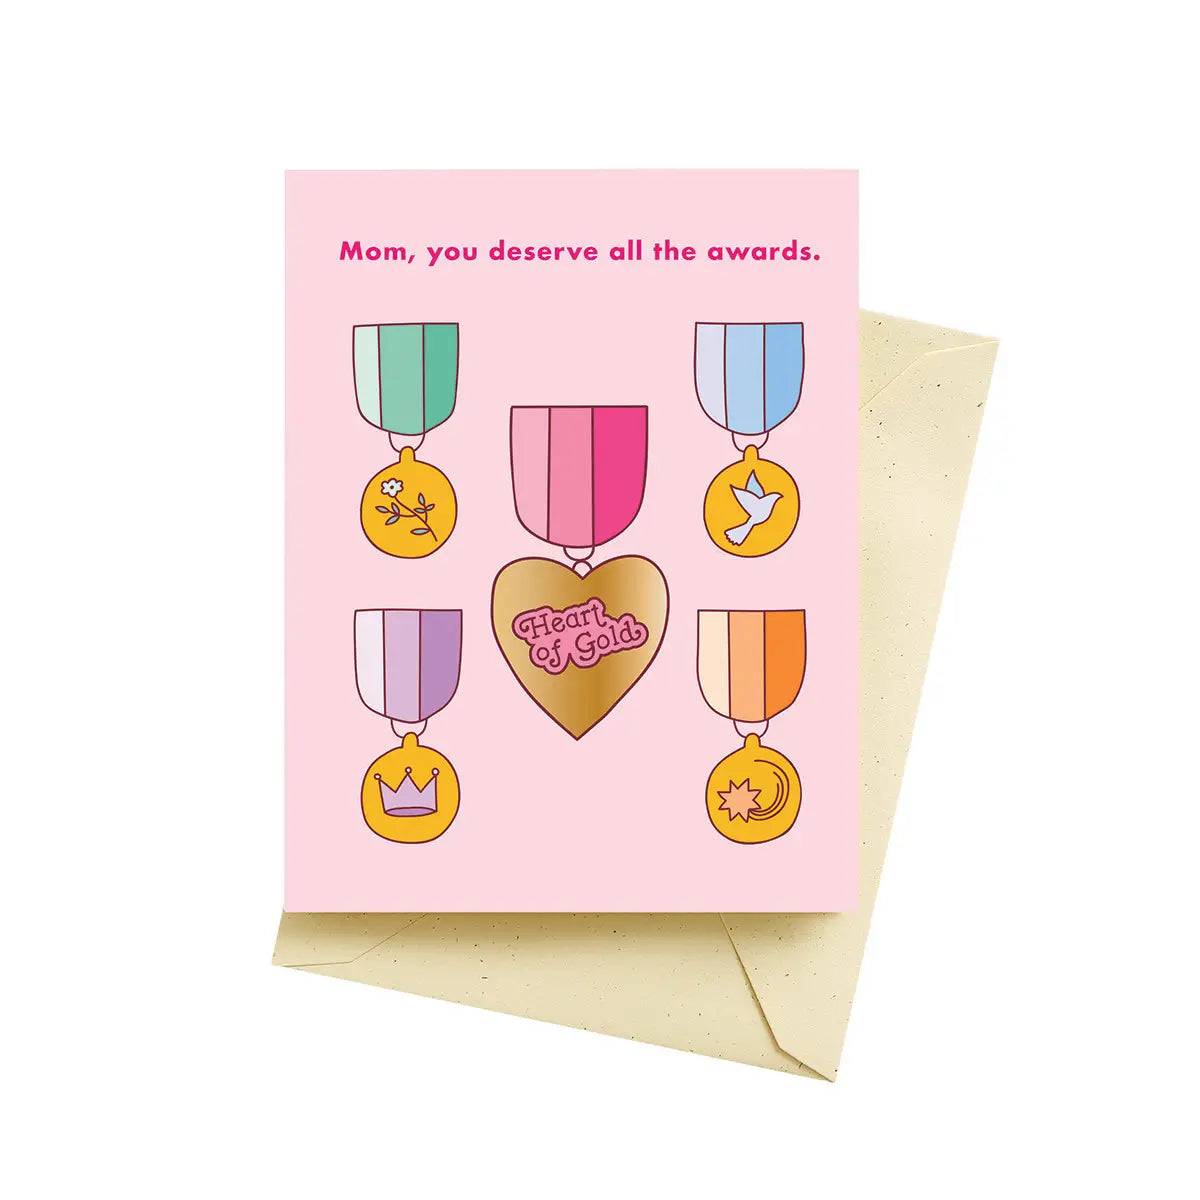 Seltzer Goods Greeting Card - Mother's Day Awards